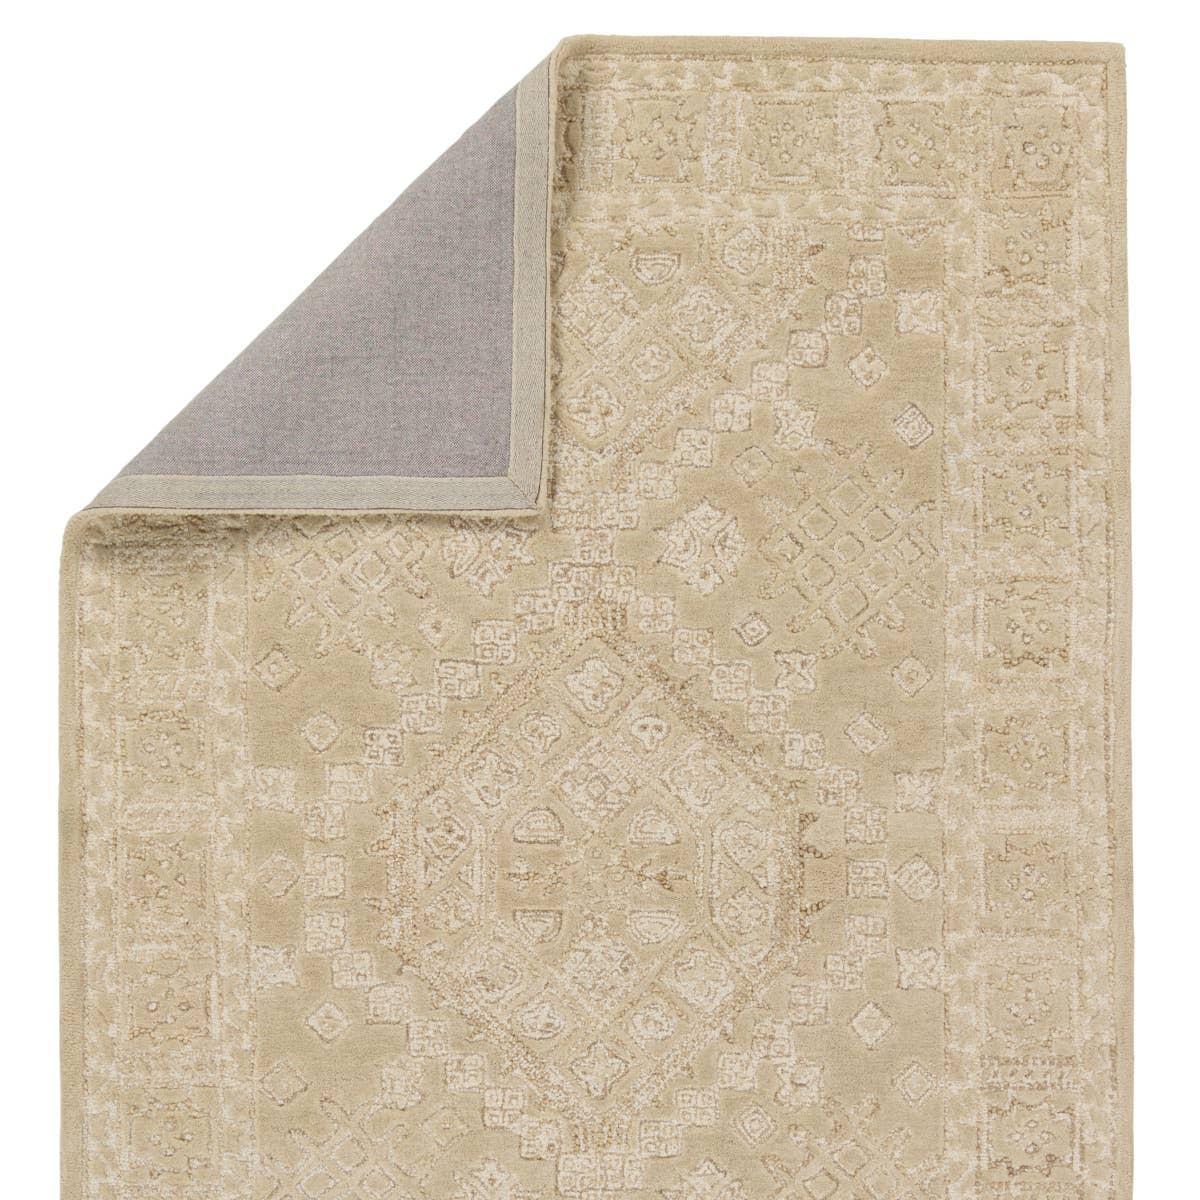 The Farryn Tomoes boasts masterfully hand-tufted designs with stunning detail and versatile colorways. The Tomoe rug features a tribal-inspired center medallion in warm hues of tan and cream. This transitional design is crafted of durable wool and complements a variety of styles, from global to rustic decor. Amethyst Home provides interior design, new home construction design consulting, vintage area rugs, and lighting in the Boston metro area.